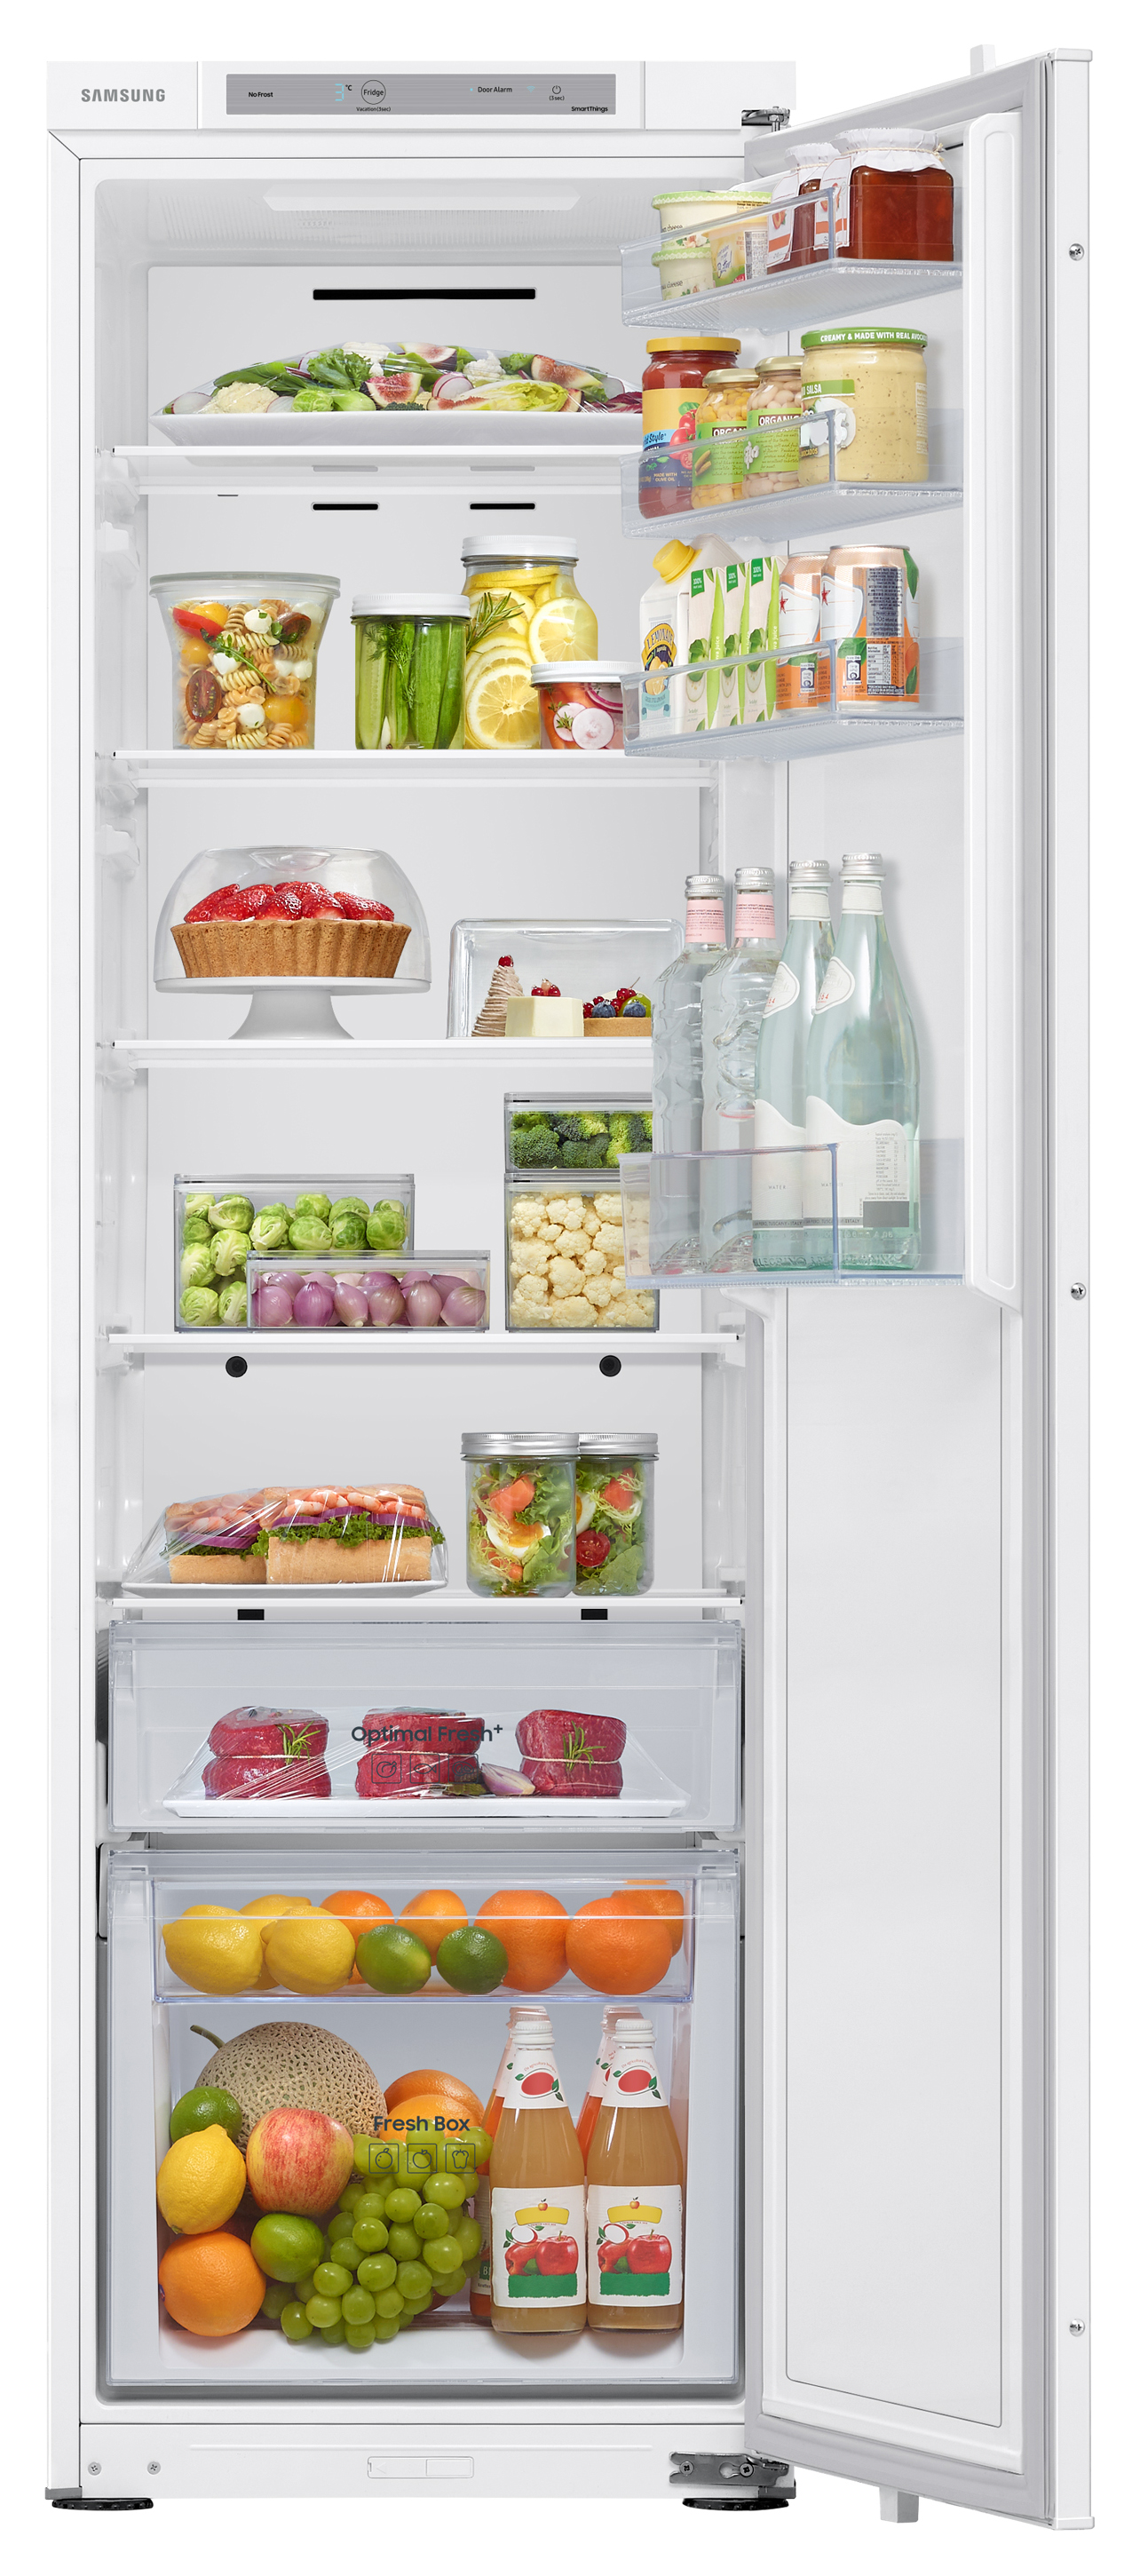 Samsung BRR29600EWW/EU Integrated One Door Fridge with SpaceMax Technology - White